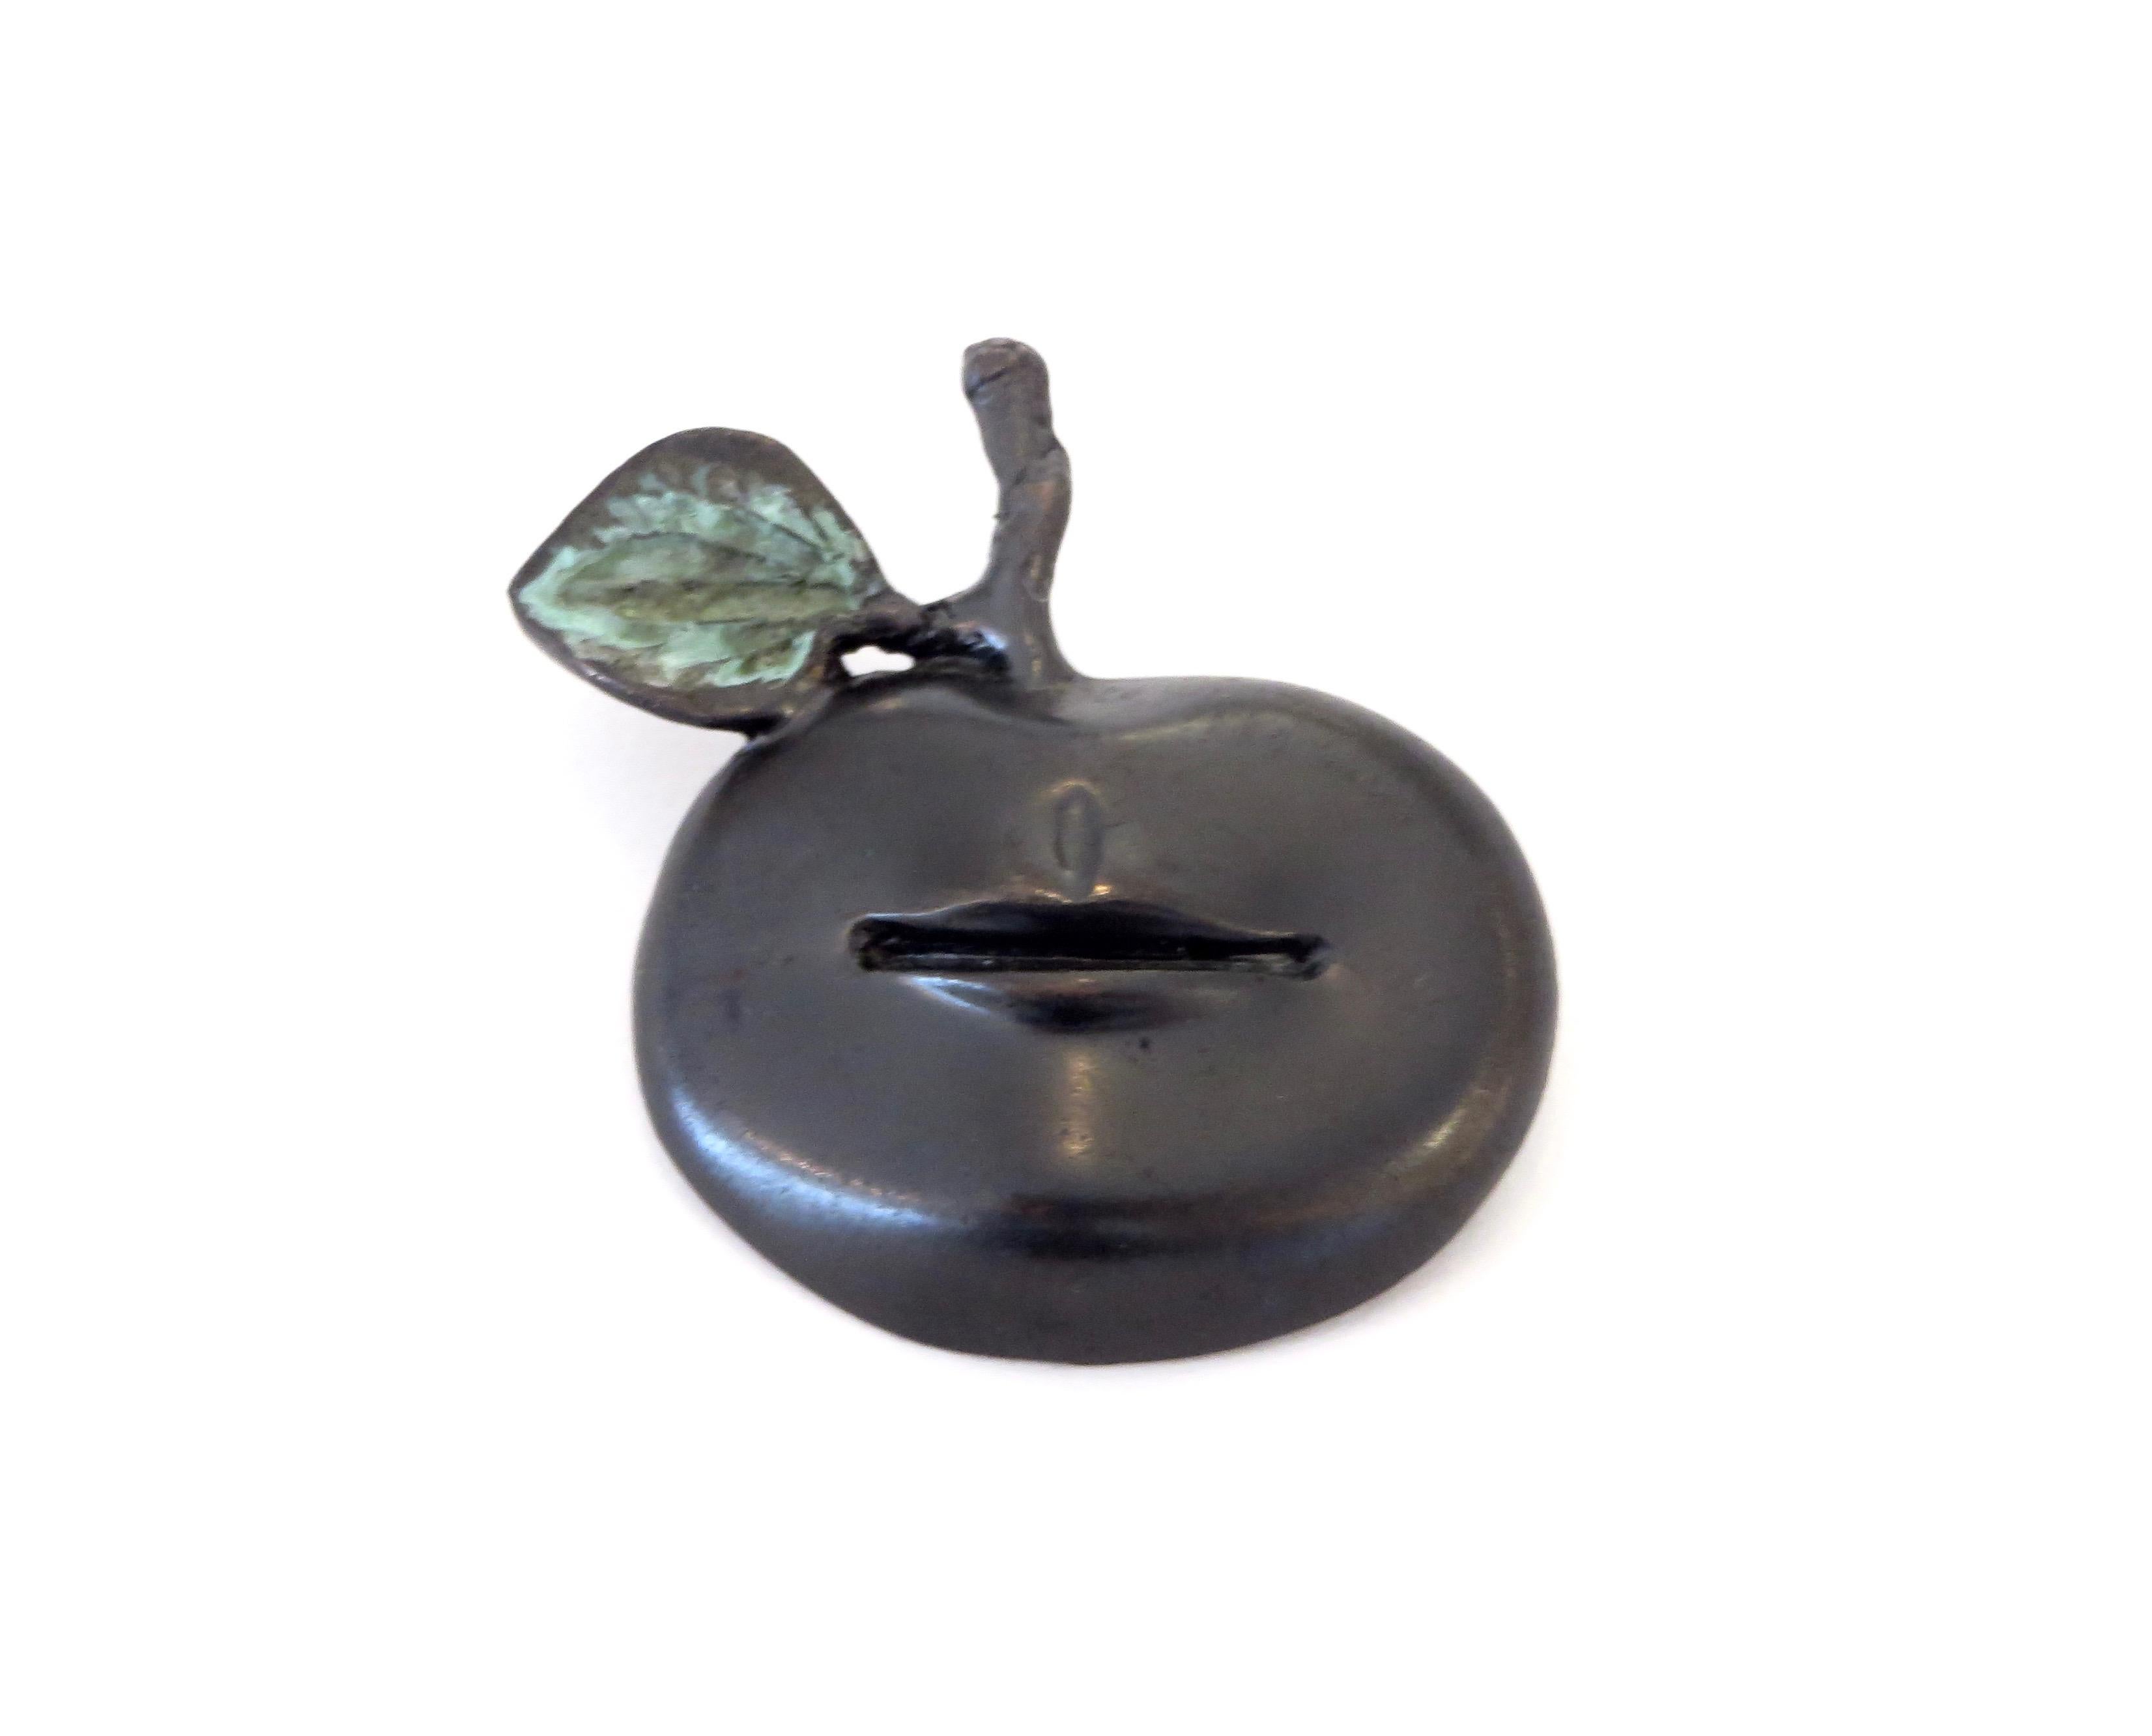 Surrealistic Pomme Bouche brooch by Claude Lalanne, created in 1975. Bronze with a dark brown patina and a verdigris leaf and stem, signed with editions mark and monogrammed Arthus-Bertrand. In 1996 the pin was reproduced by Arthus Bertrand on the